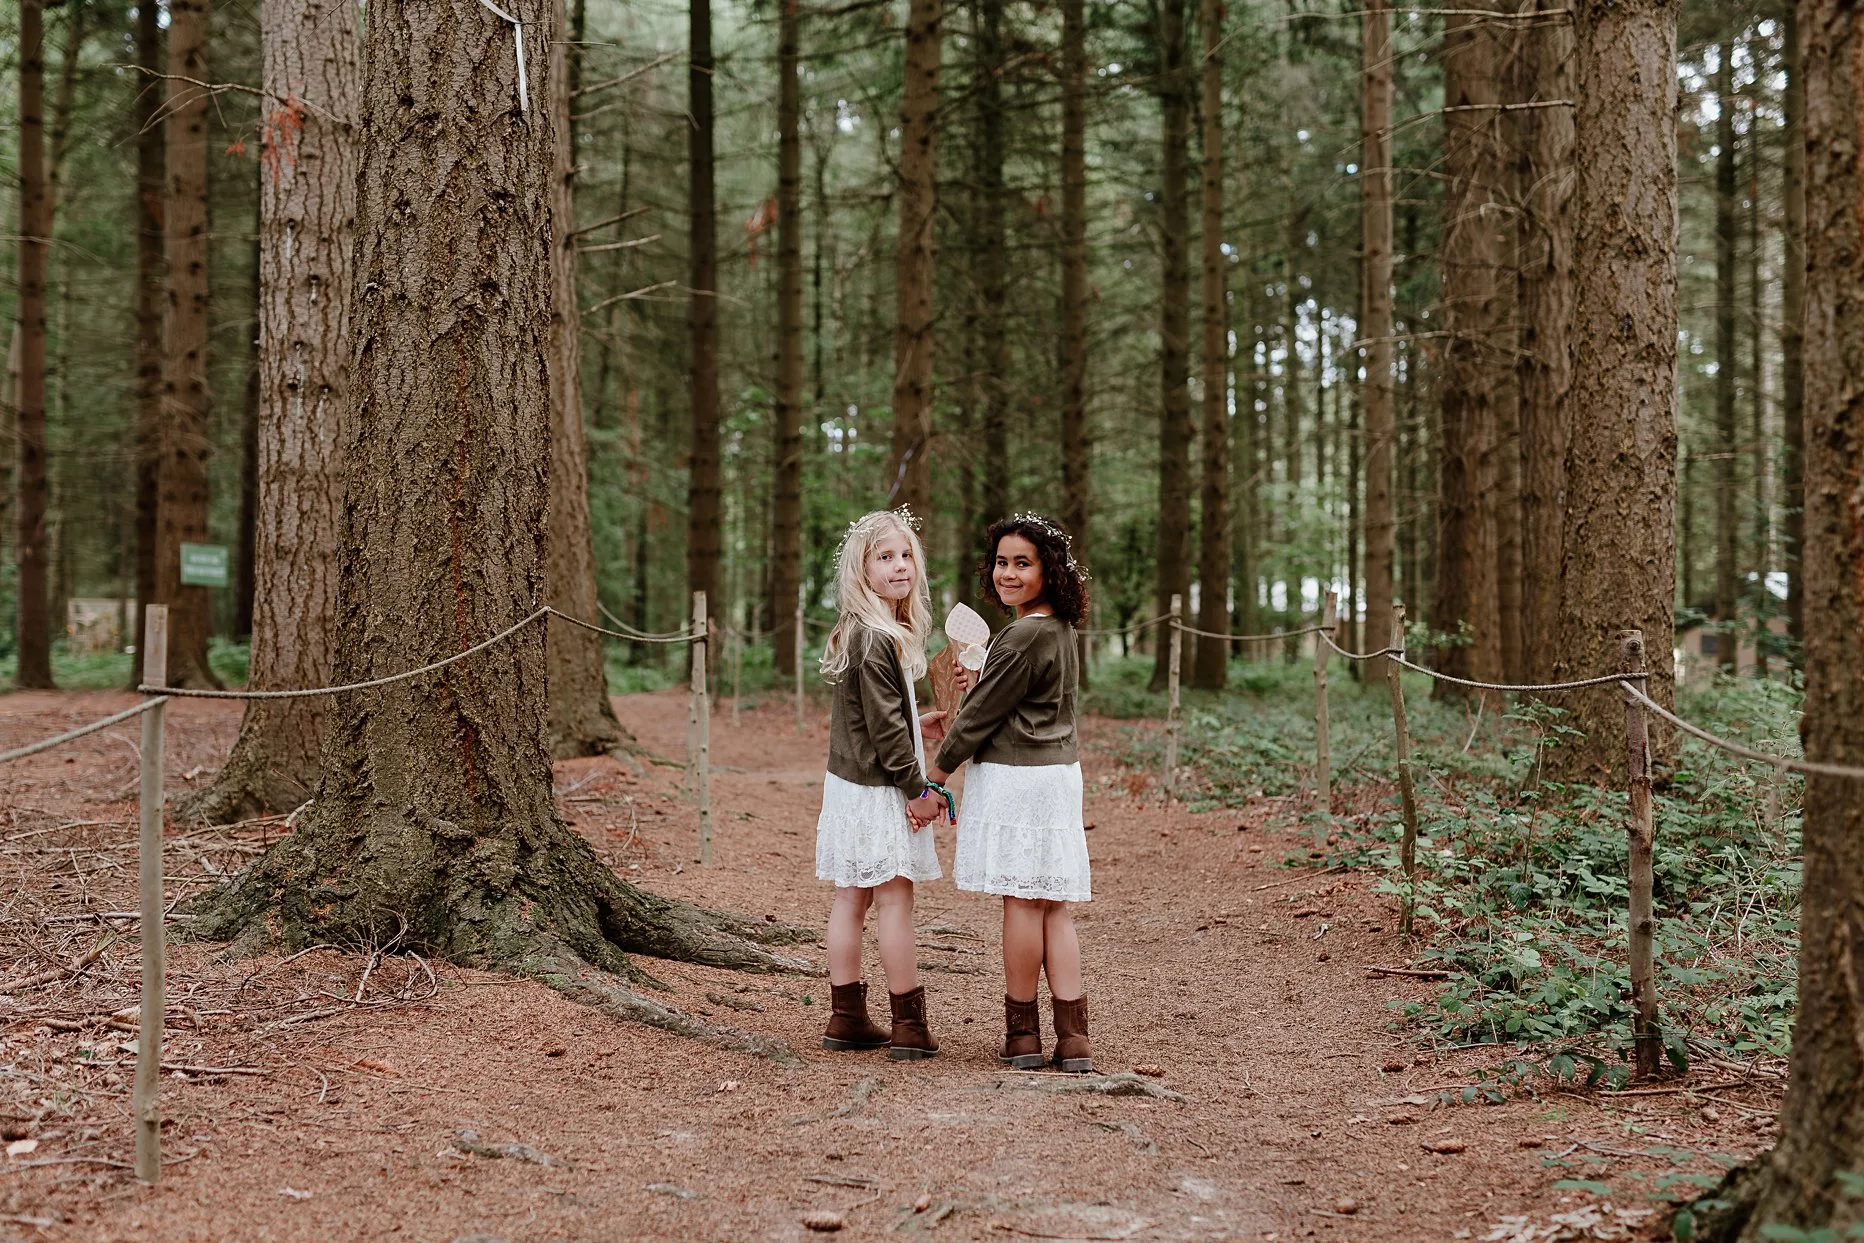 Two young flowergirls walking through the woods to outdoor wedding at camp katur. Flowergirls are wearing short white lace dresses with brown cowboy boots.